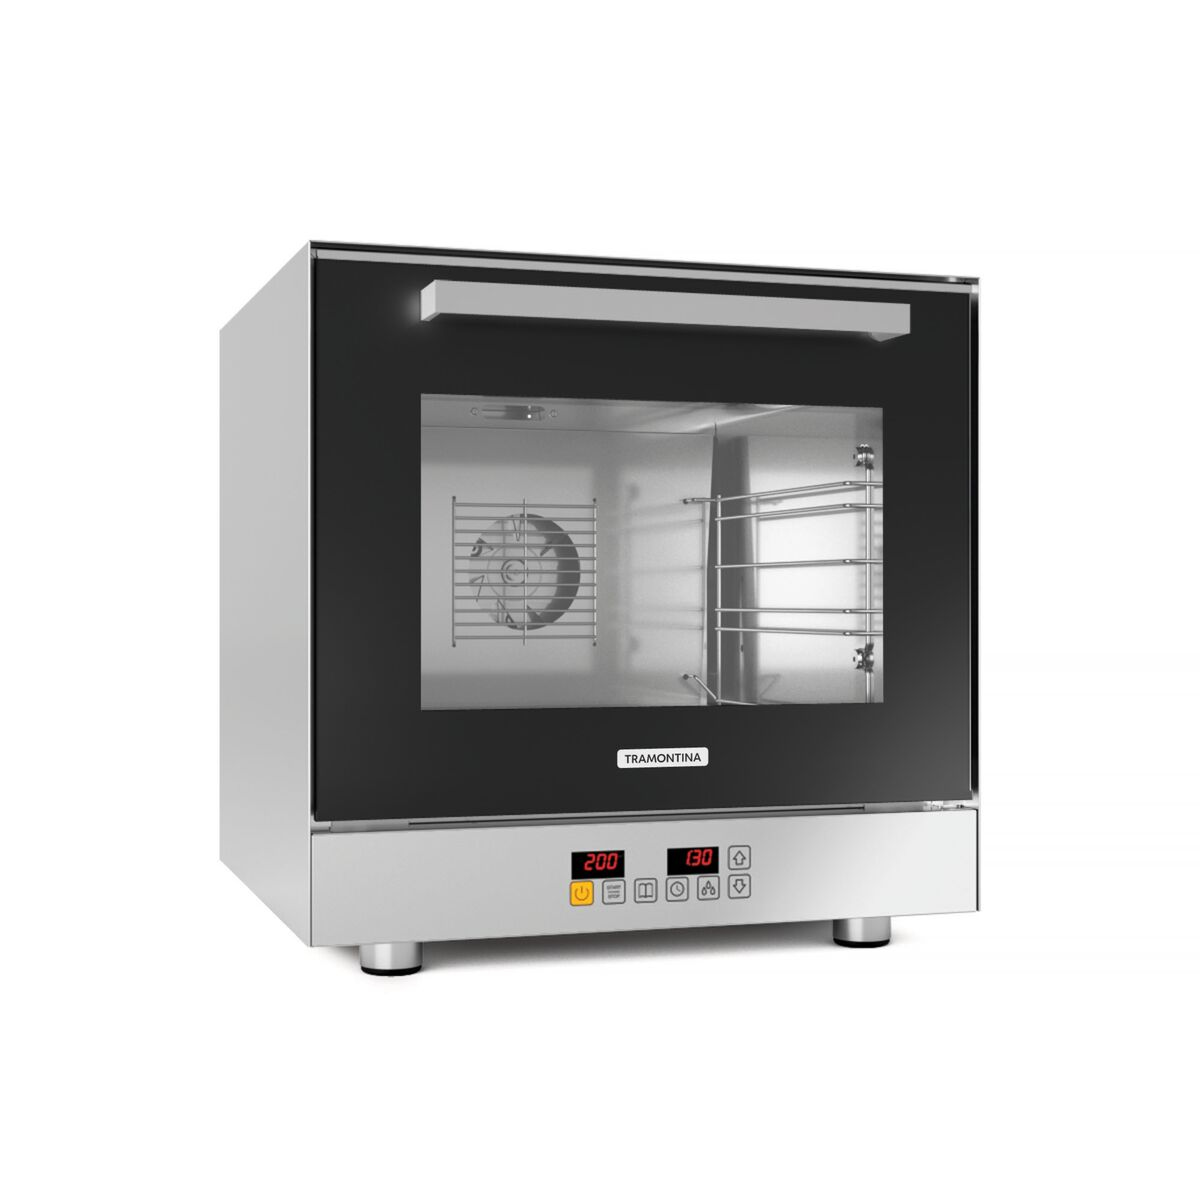 Tramontina digital electric convection oven 590x620mm